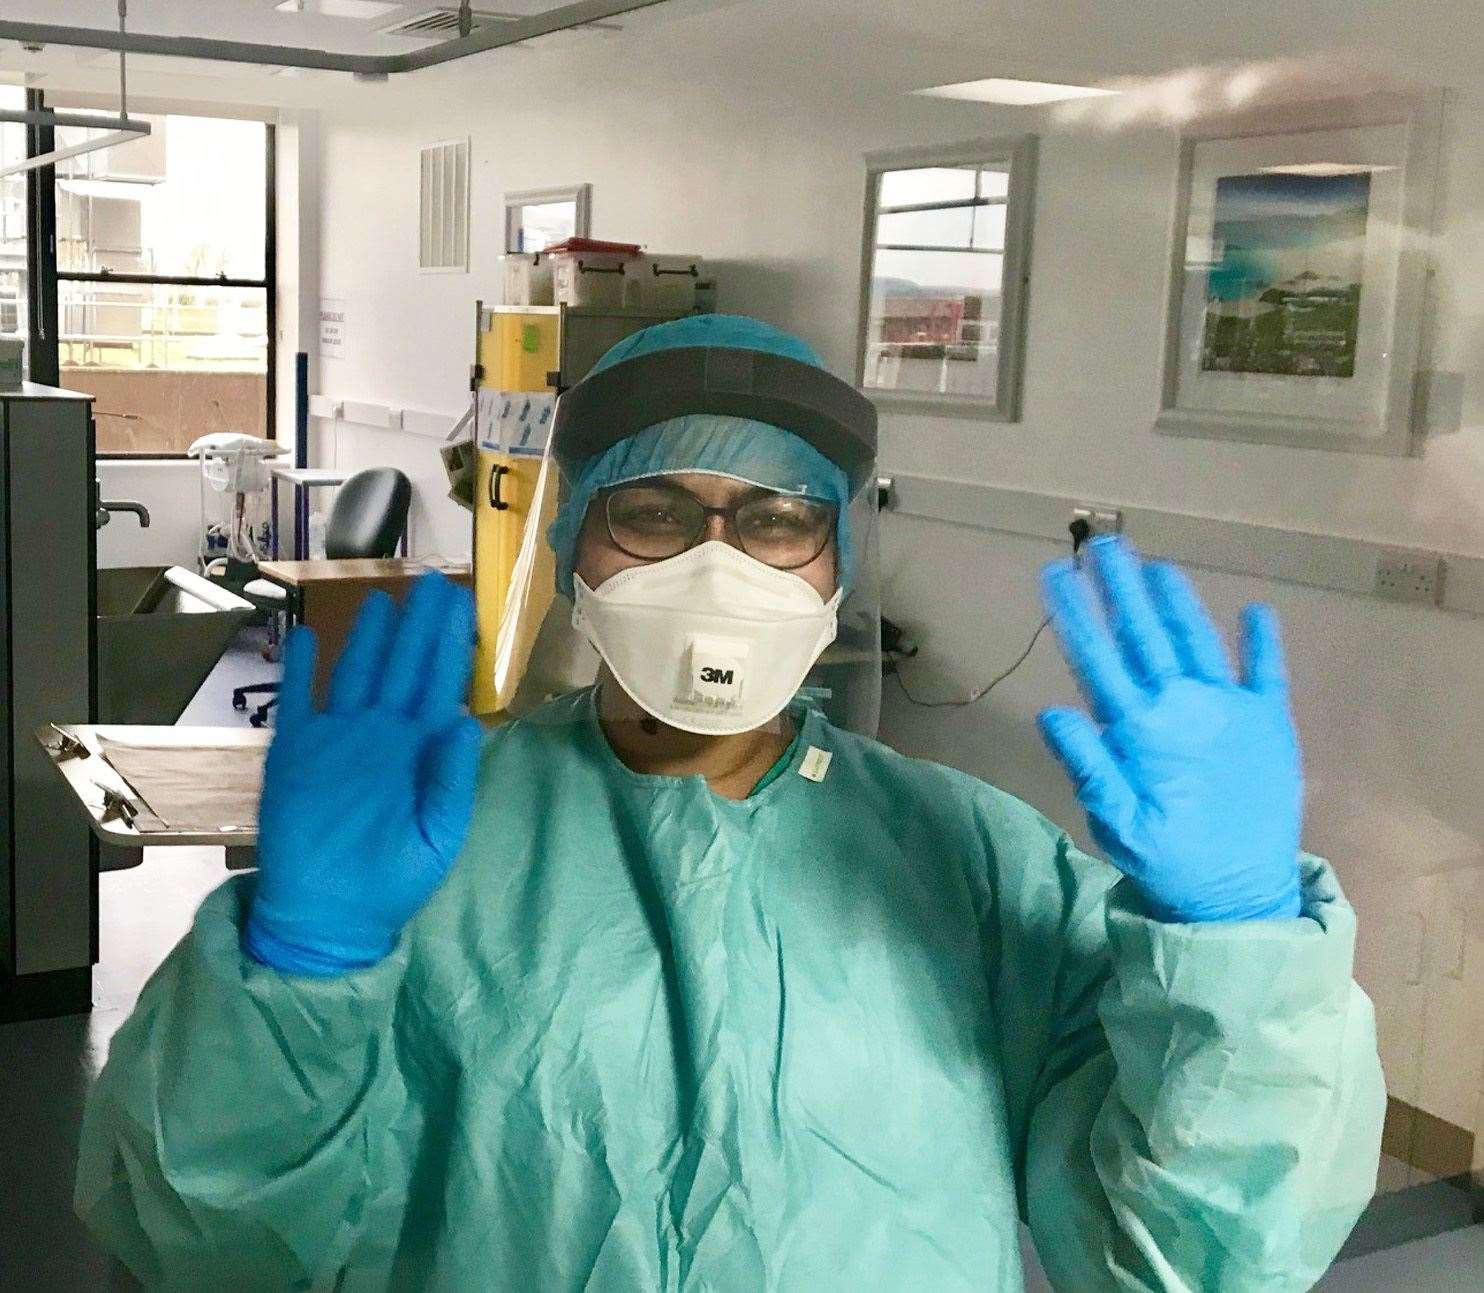 Visors developed by Inverness-based companies Aseptium, 4c Engineering and LifeScan.